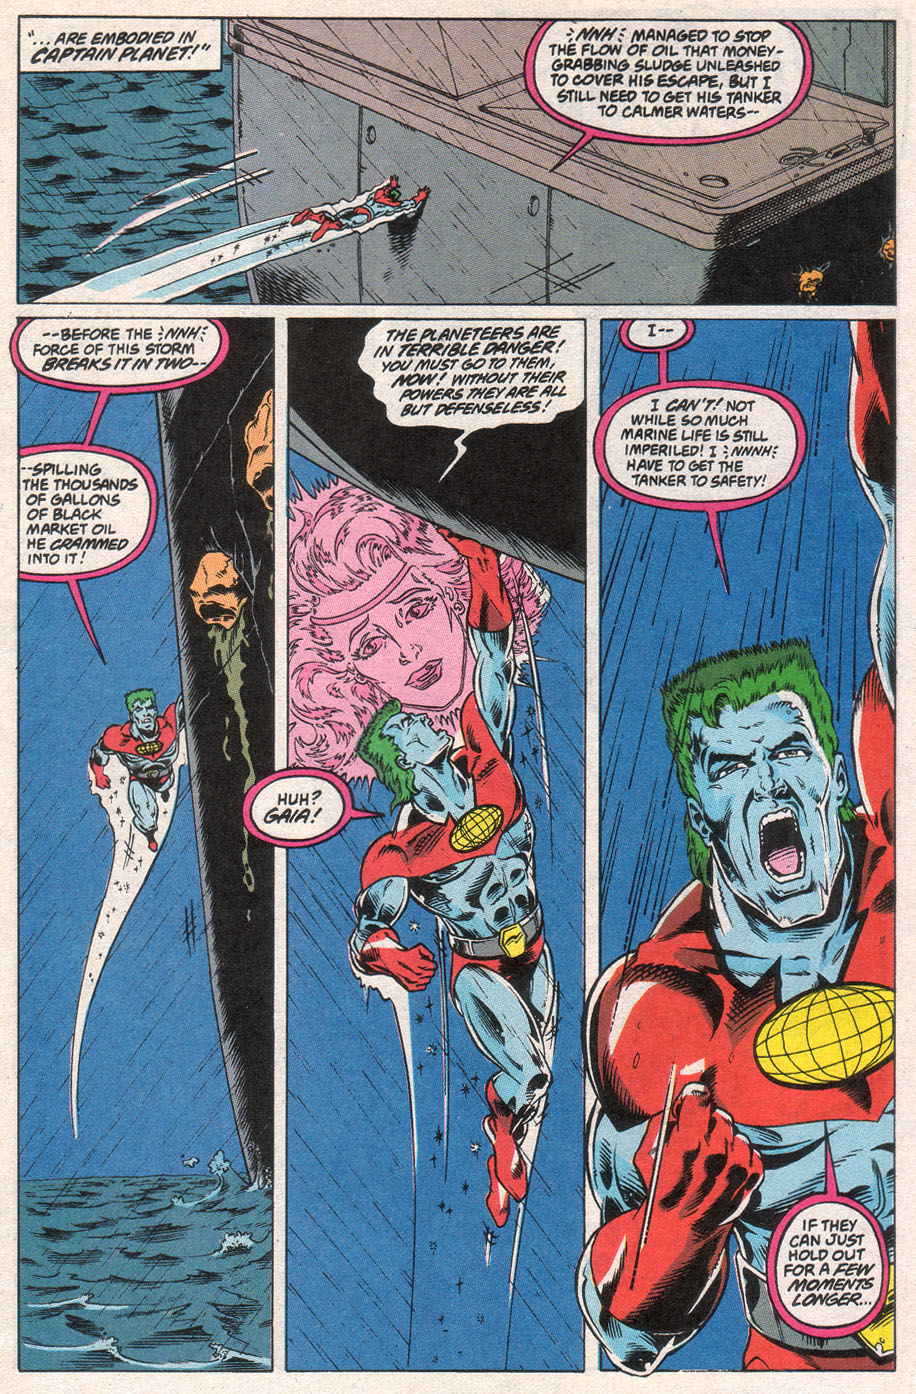 Captain Planet and the Planeteers 10 Page 4